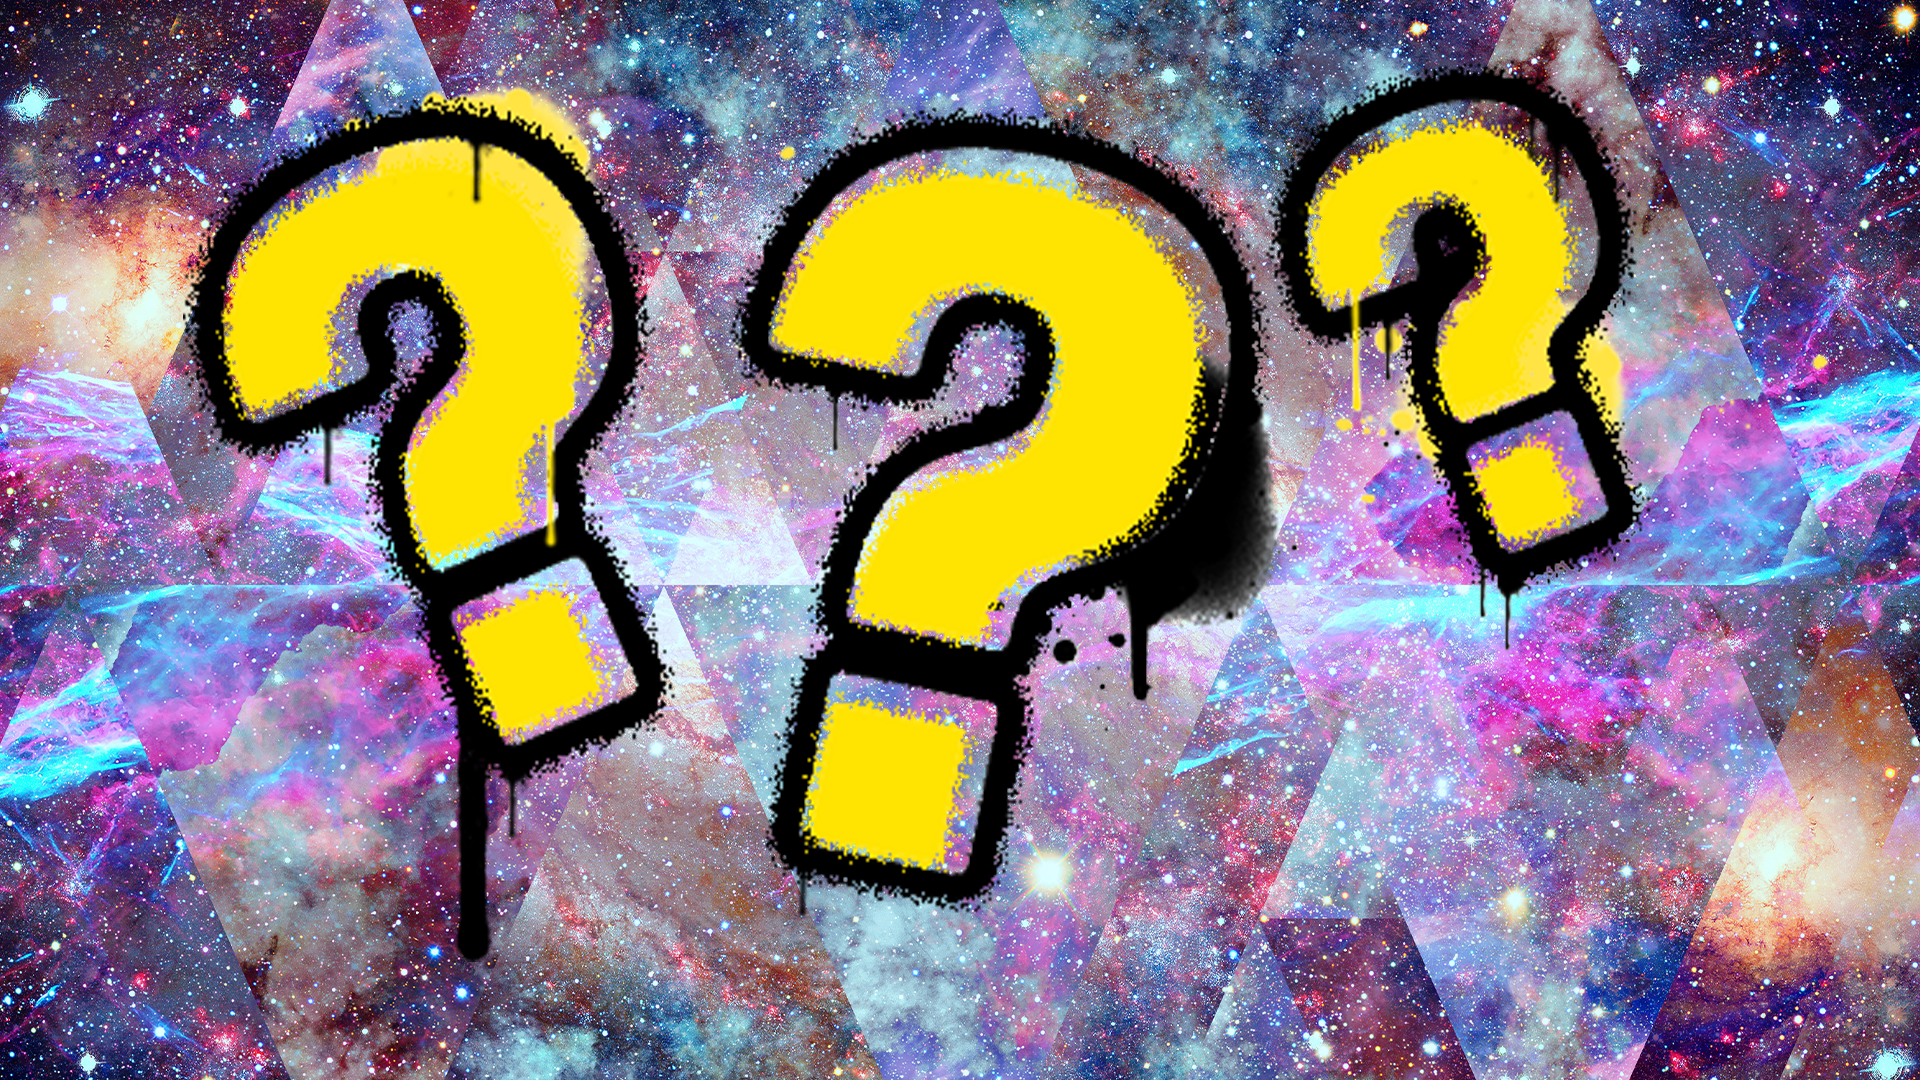 Question marks on celestial shape background